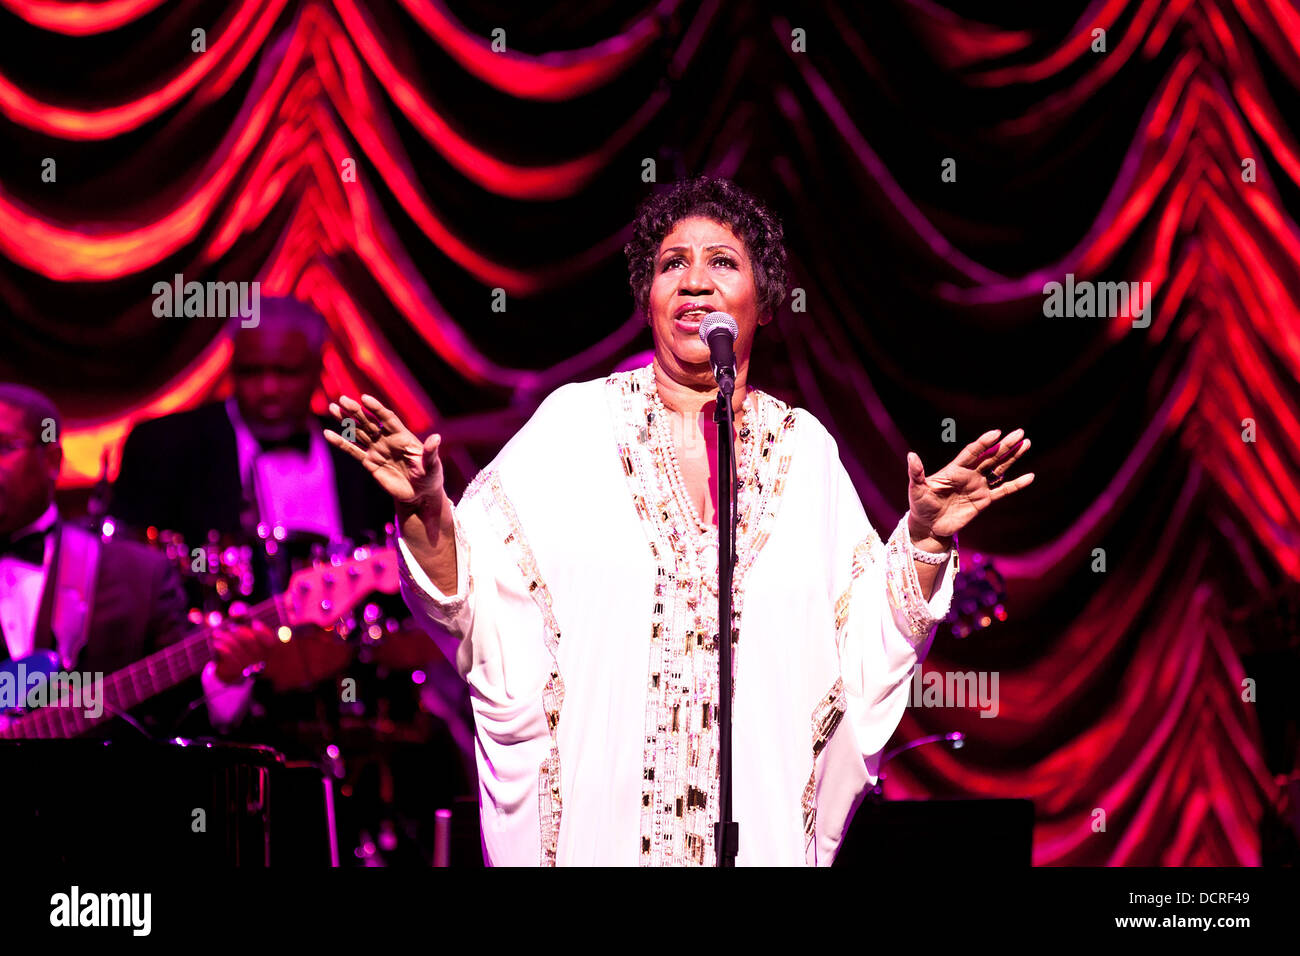 Aretha Franklin performing at the Austin City Limits Live Moody Theater. Austin, Texas - 15.11.11 Stock Photo